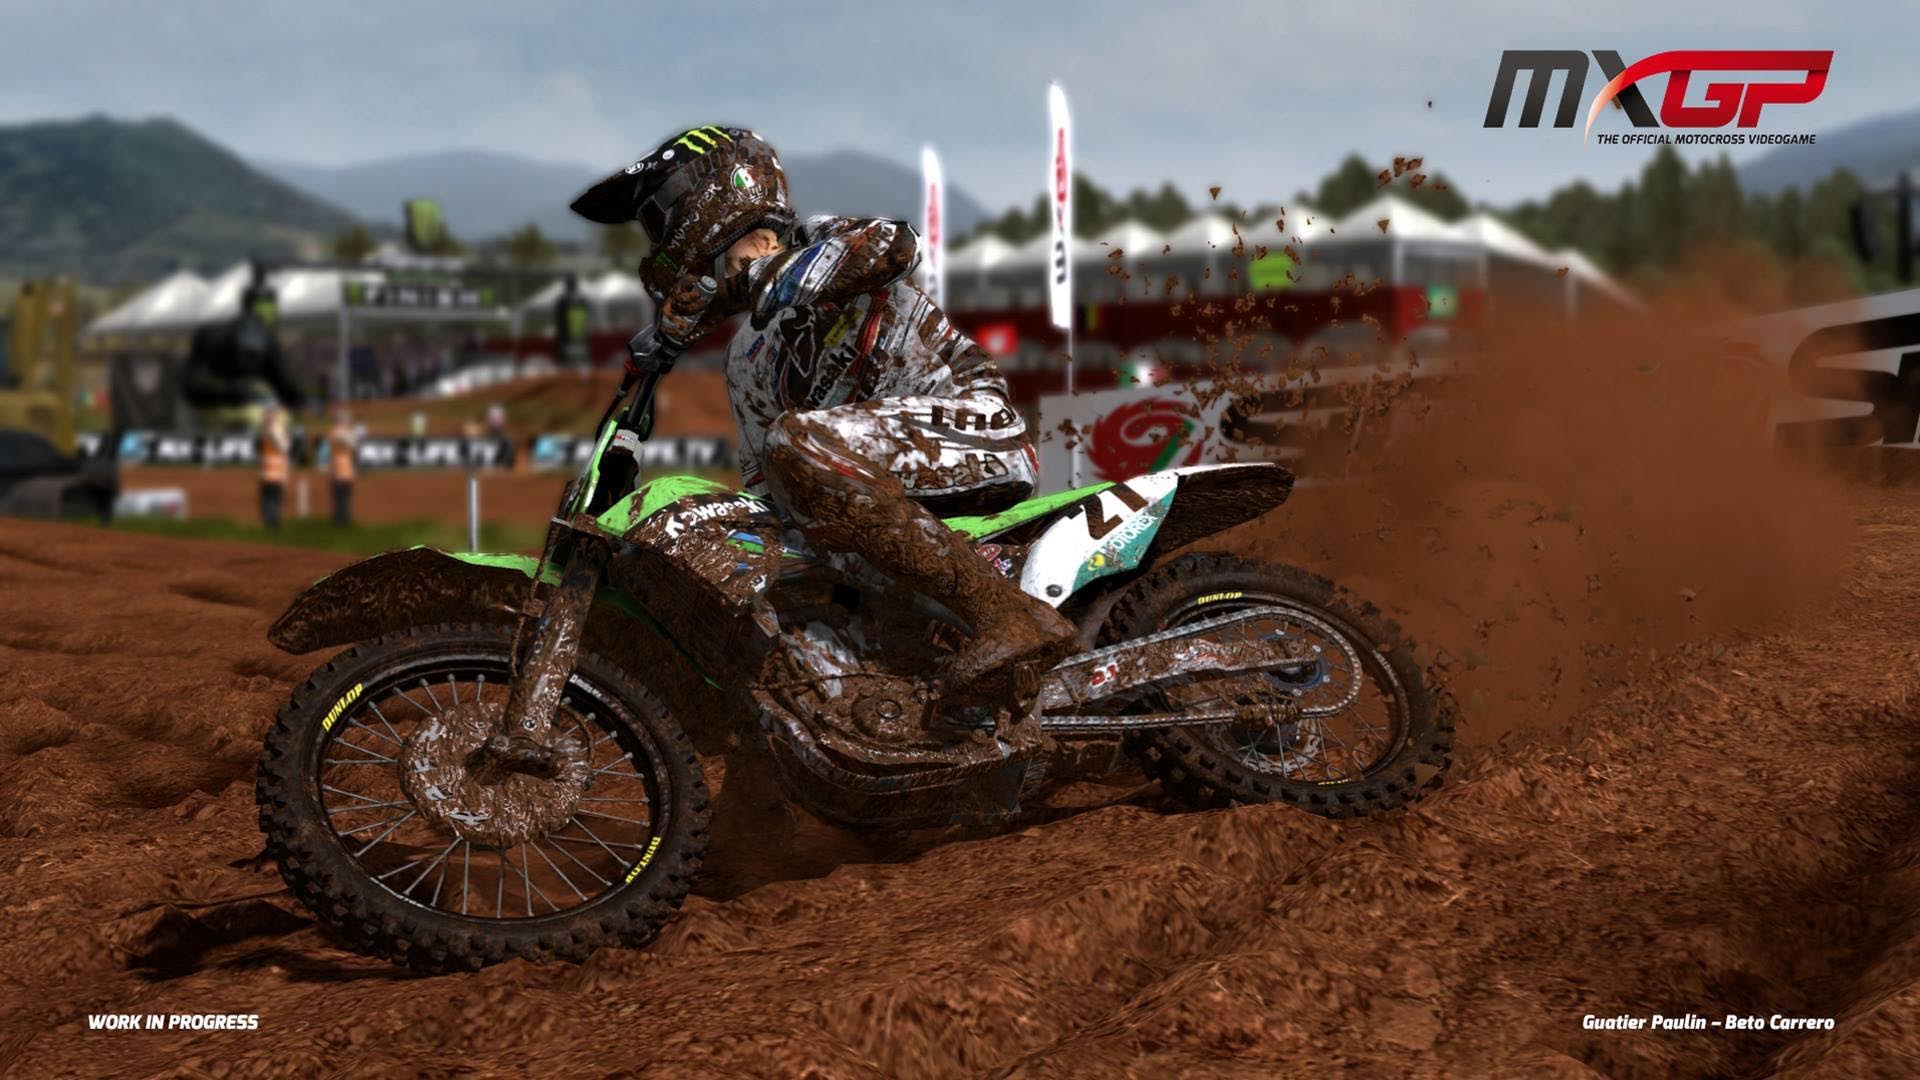 If you prefer arcade-style games, or if you want to race dirt bikes, pick this one. In Motocross, agility and quick reflexes matter a lot more than taking a clean line through a turn. The races can devolve into absolute chaos and collisions are commonplace. While clean riding will take you ahead of the pack and guarantee a win, there’s plenty of fun to be had in the fray. | <b>For:</b> PC, PS4, PS3, Xbox 360, Vita